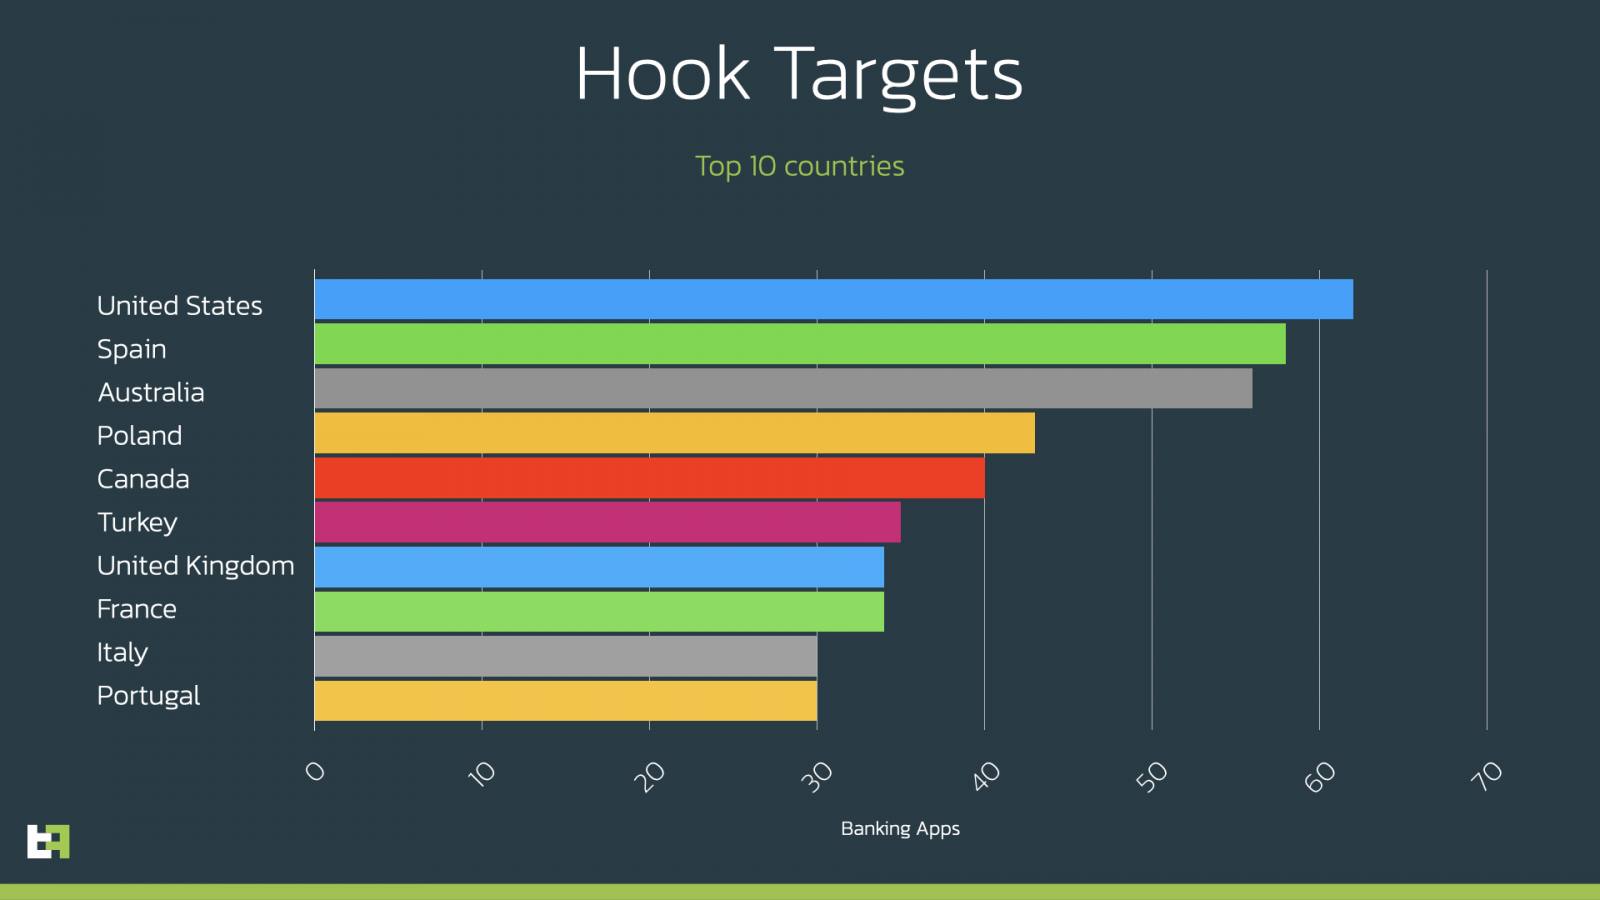 Hook targets the number of banking apps per country